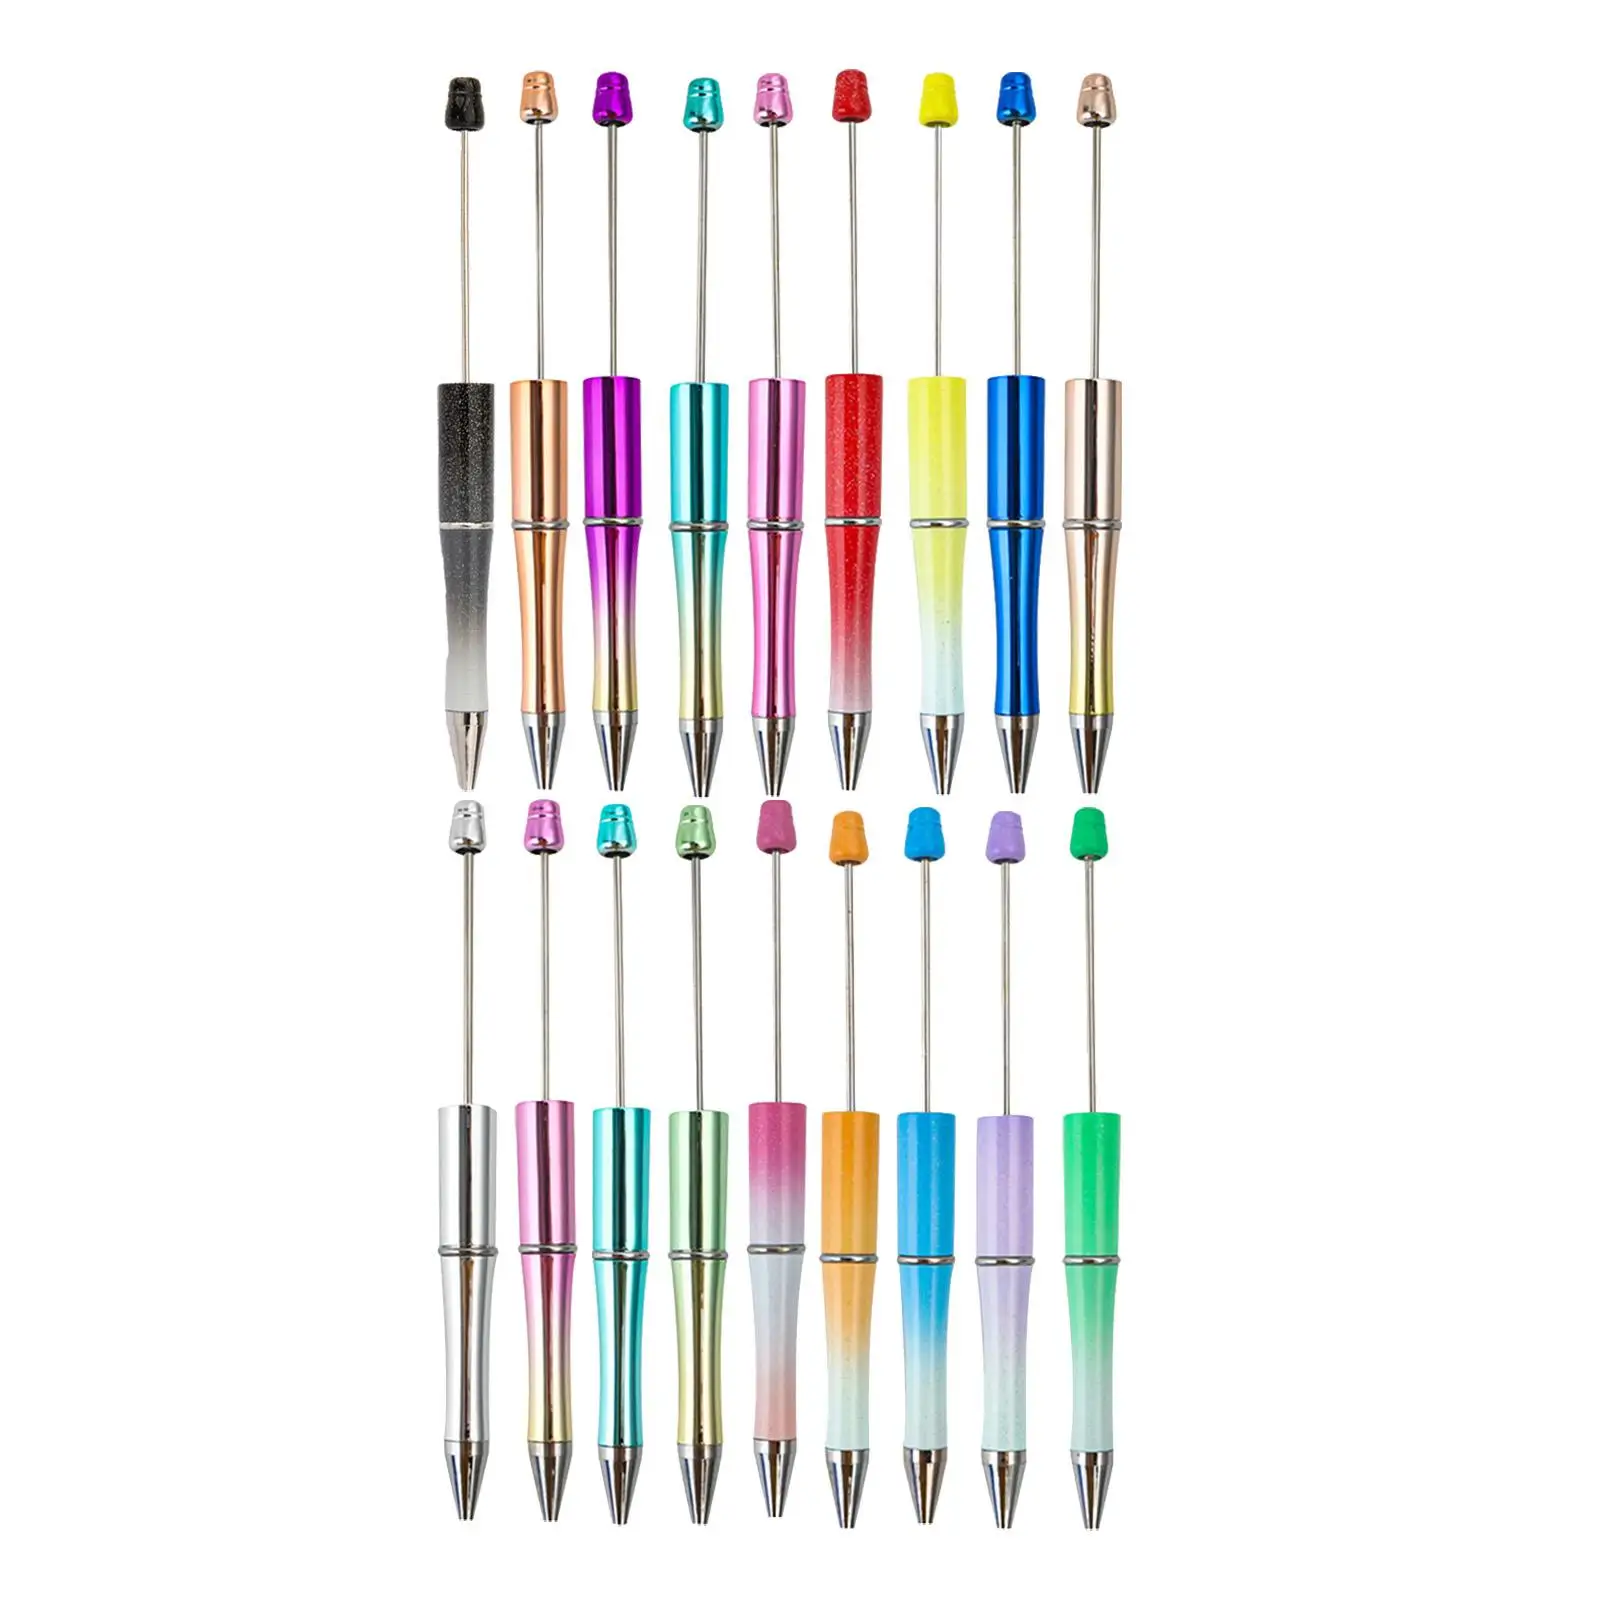 18x Beadable Pen DIY Craft Kits Crafting Pens for Office Classroom School